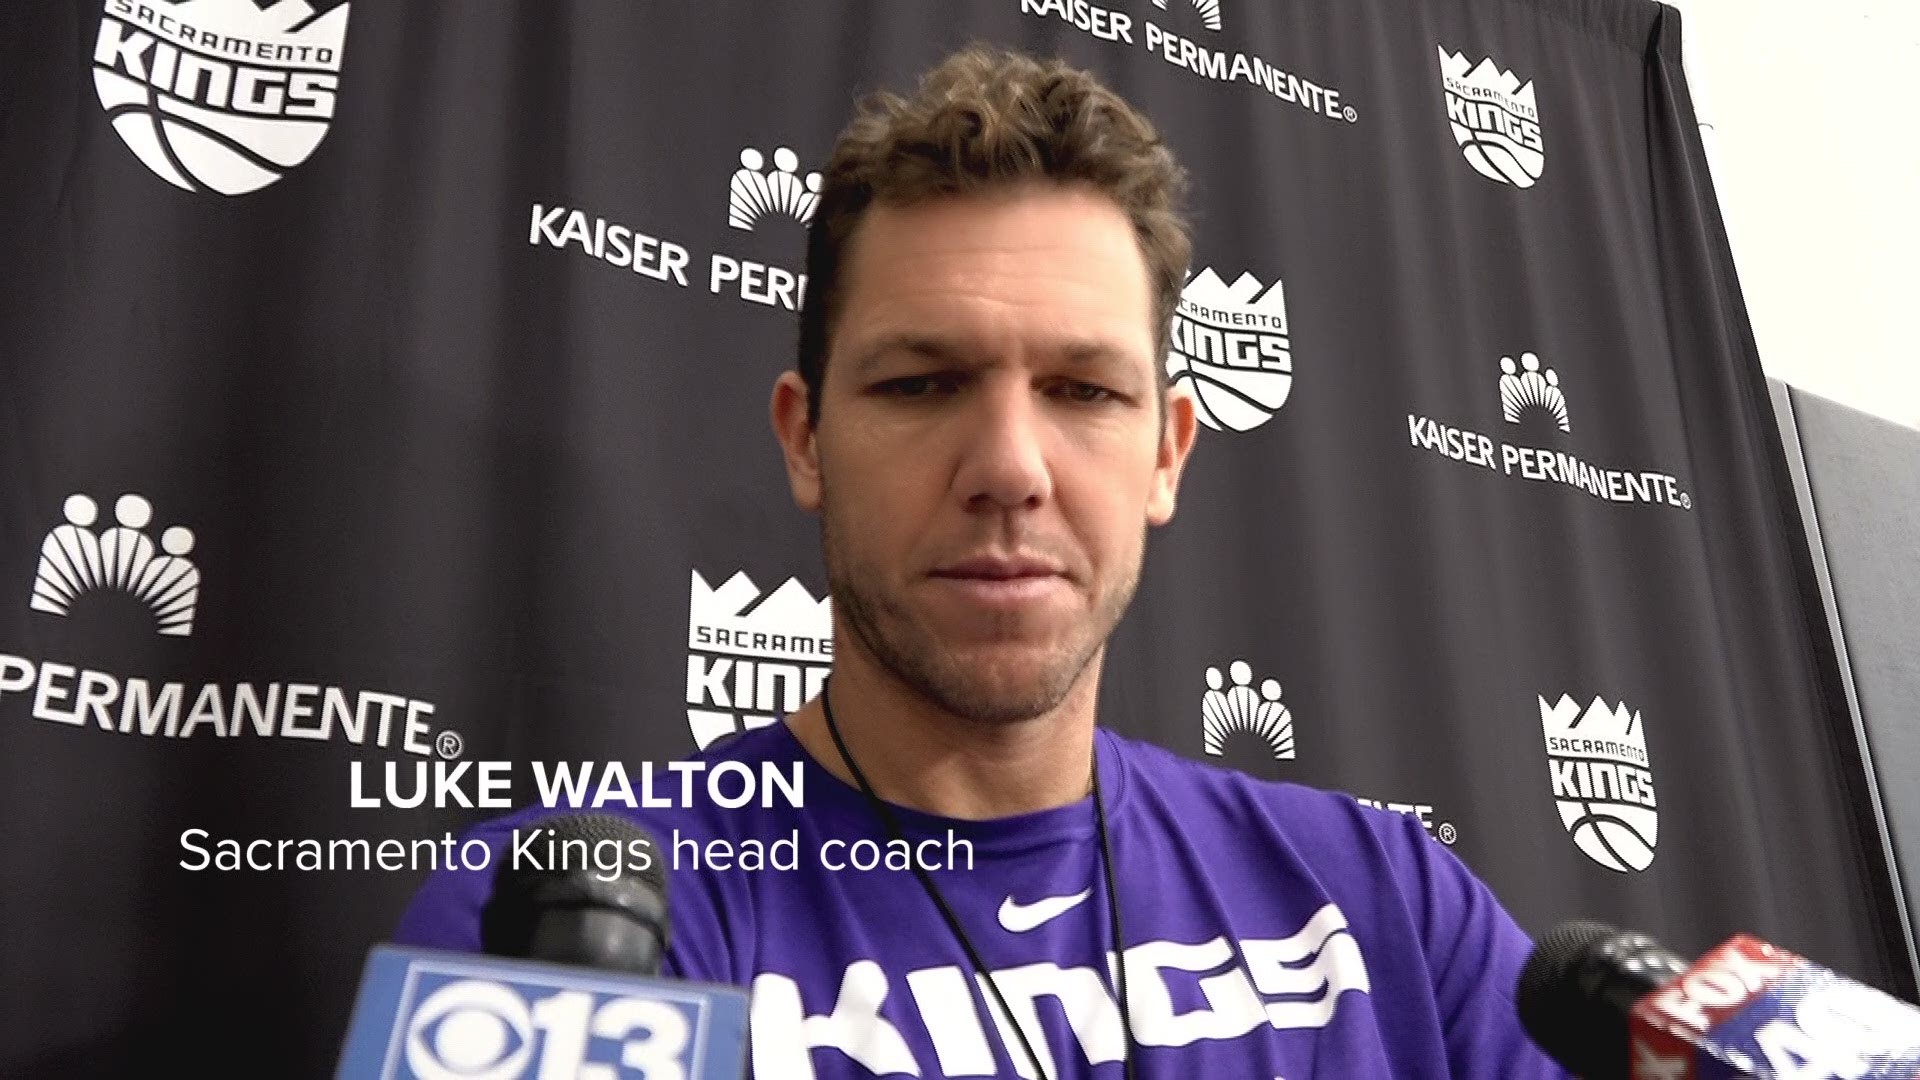 Sacramento Kings head coach Luke Walton is preparing to face the Portland Trail Blazers for the second and final time in this young NBA season.